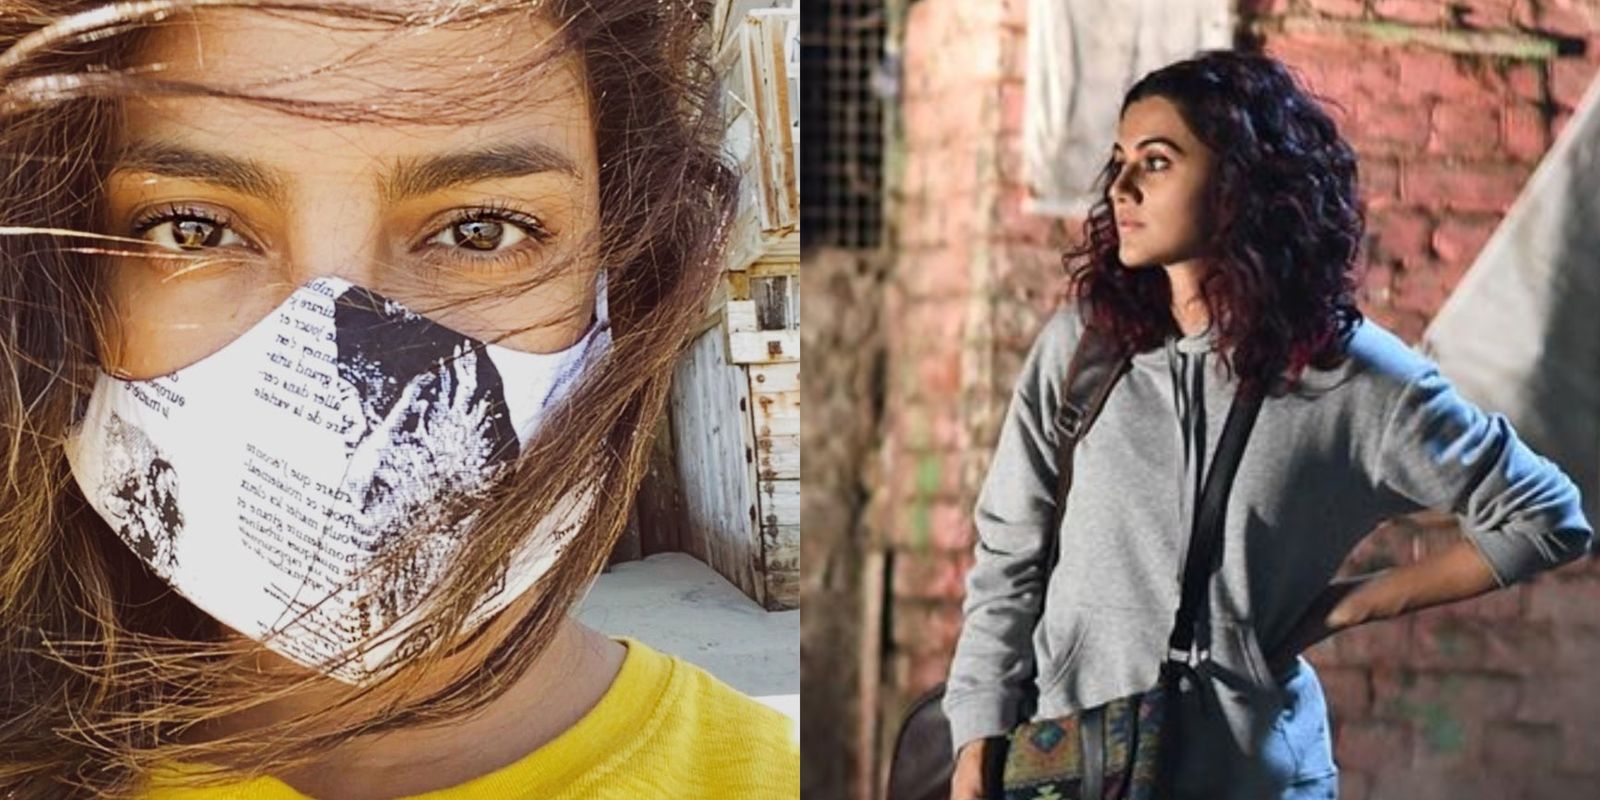 Priyanka Chopra Steps Out For The First Time In 2 Months; Taapsee Pannu Shares A Relatable Still From Manmarziyaan